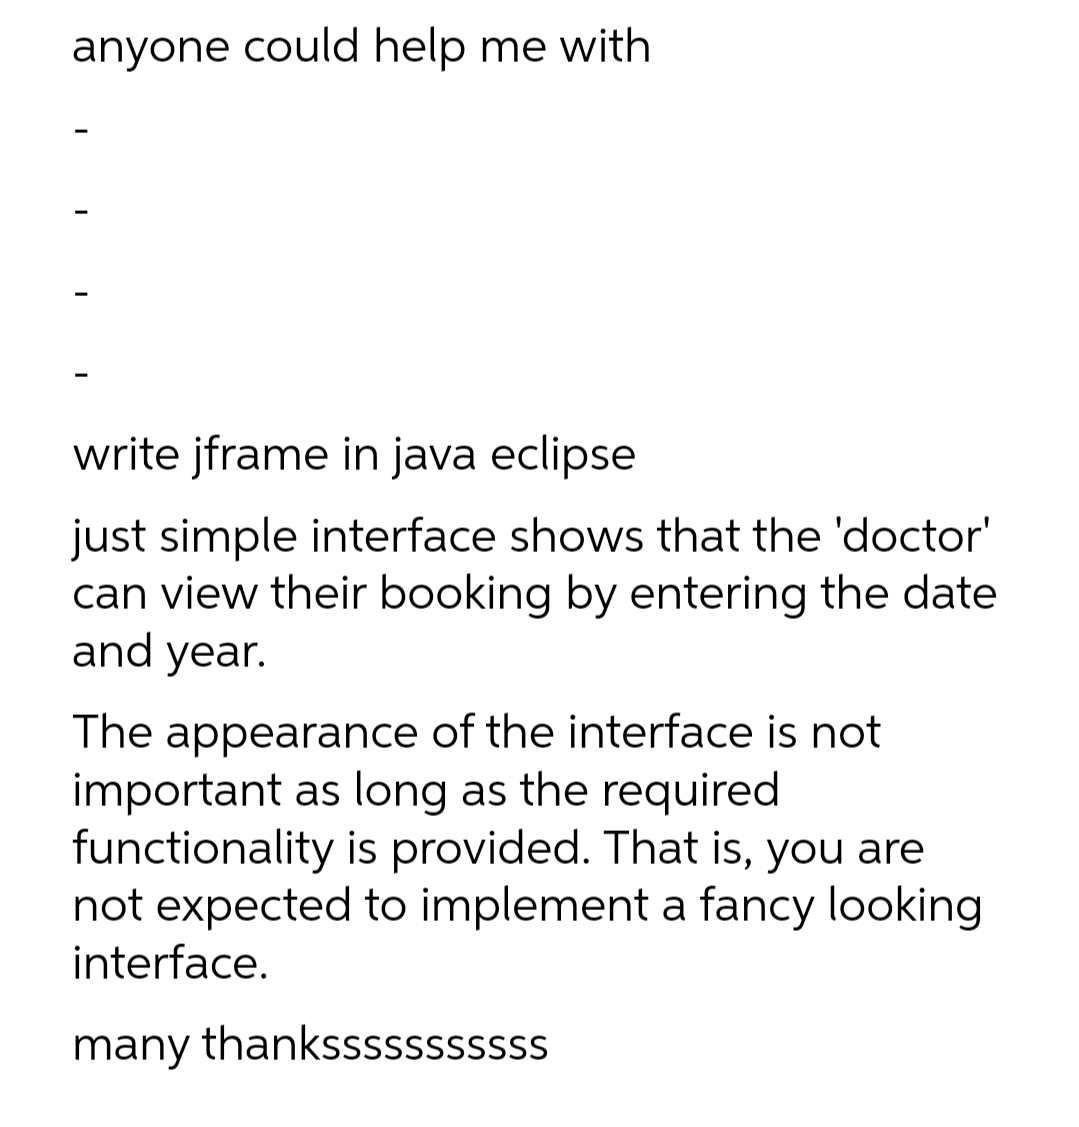 anyone could help me with
write jframe in java eclipse
just simple interface shows that the 'doctor'
can view their booking by entering the date
and year.
The appearance of the interface is not
important as long as the required
functionality is provided. That is, you are
not expected to implement a fancy looking
interface.
many thanksssssssssss
